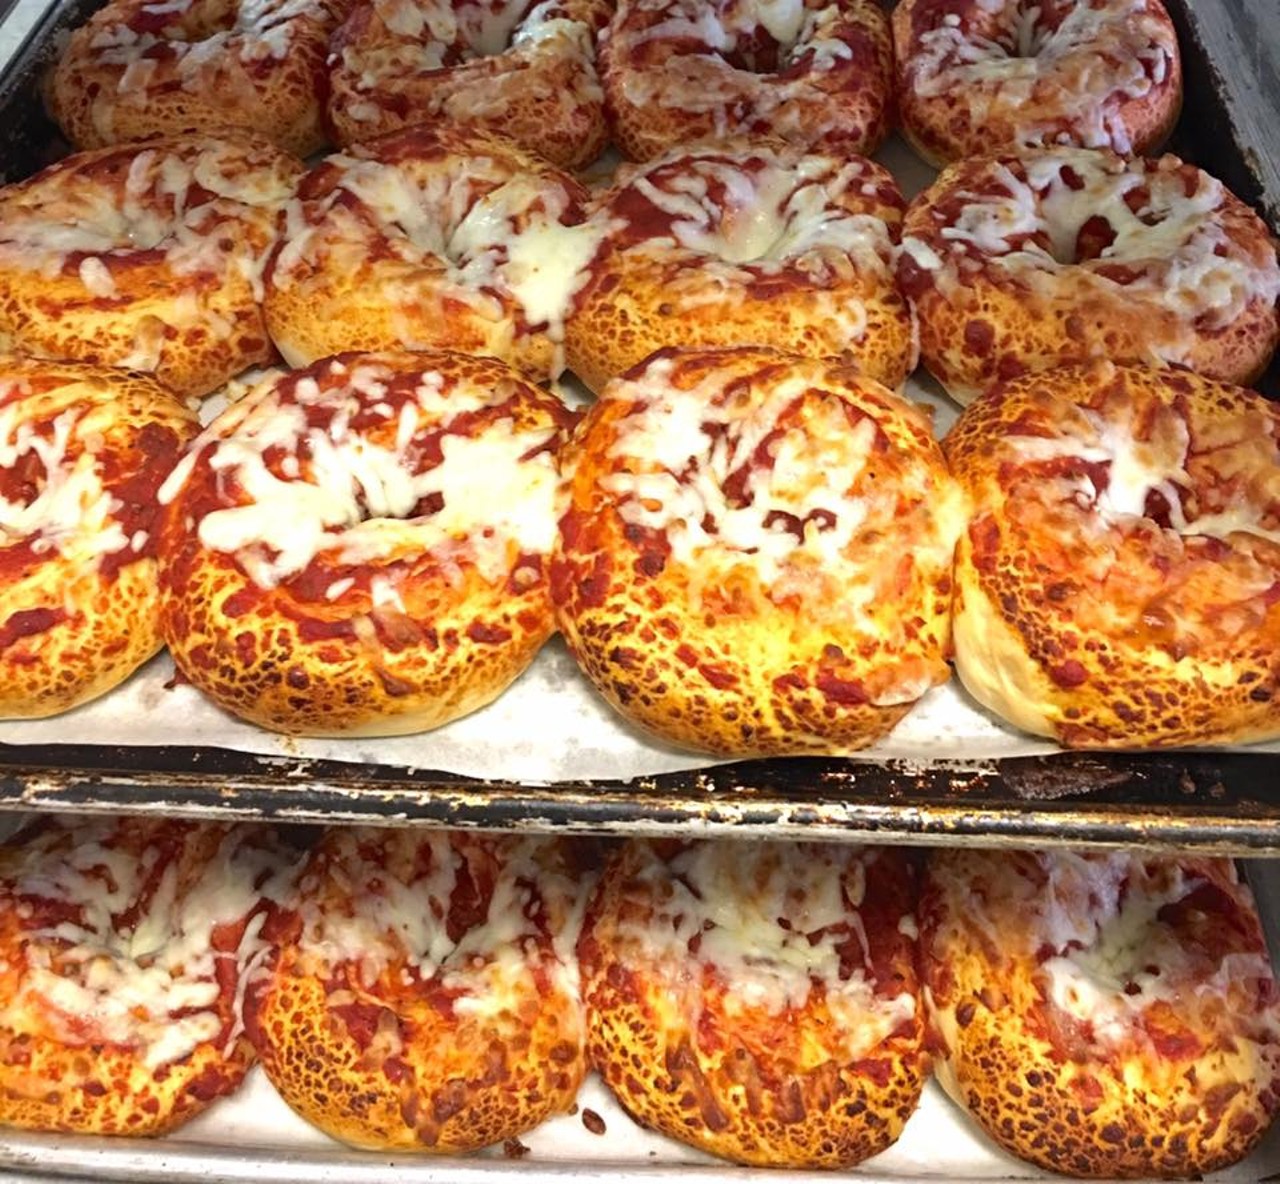 Pizza Bagel 
What: The doughy rolls coated in cheese and tomato sauce
Why: Cleveland's Frickaccio's was one of the earliest purveyors of the pizza bagel, tempting none other than President Obama, who stocked up on the bagels before heading back to the White House
Photo via The Pizza Bagel Lady/Facebook